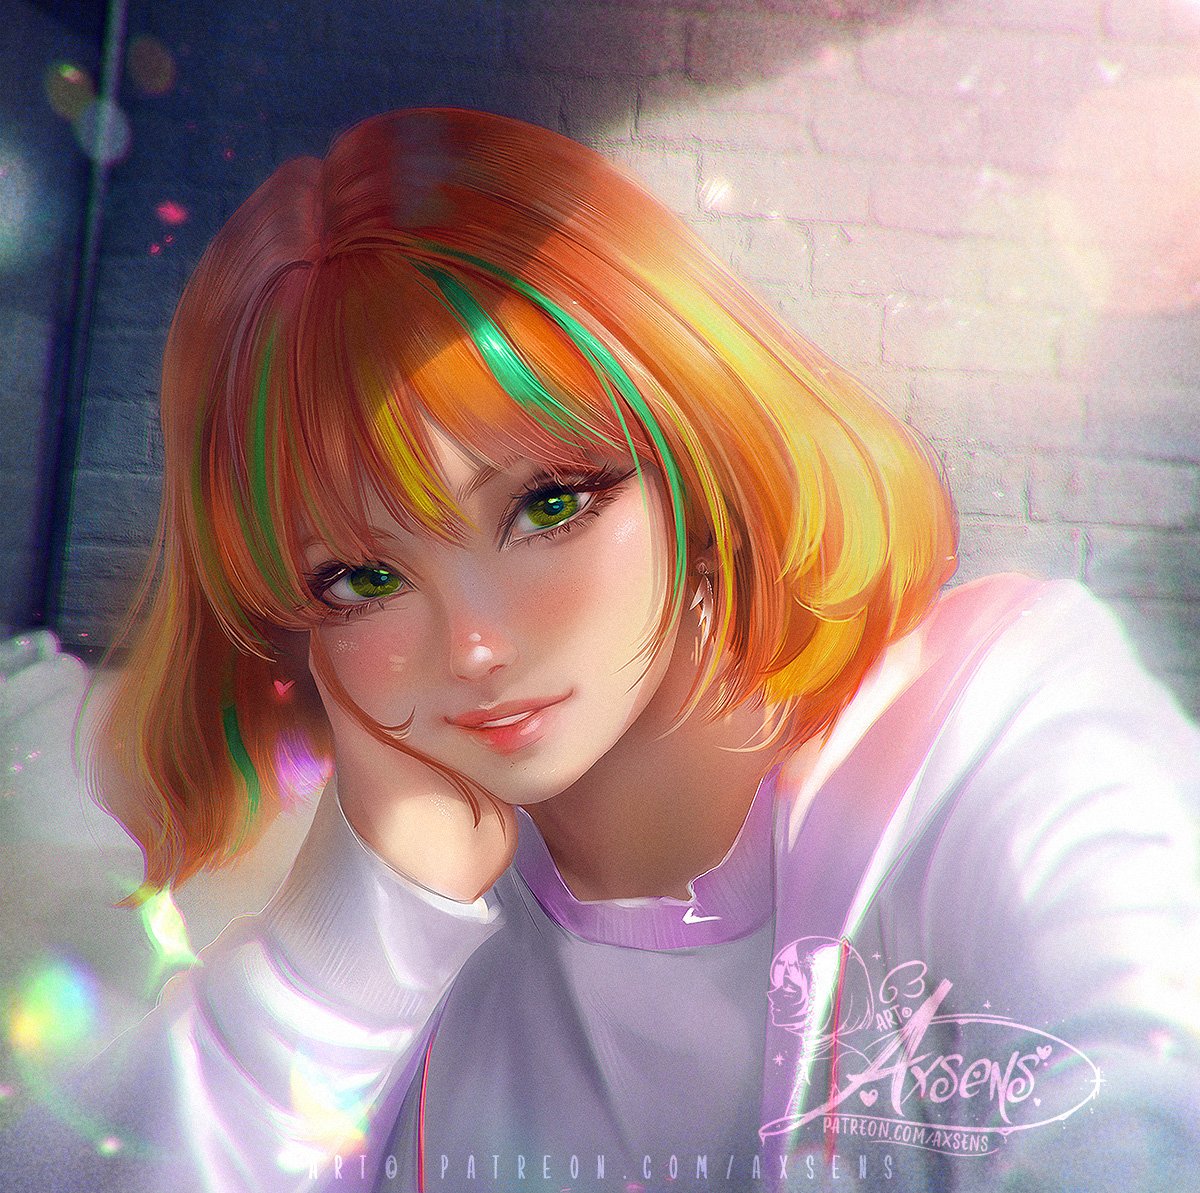 Smile

Finished render from my last Portrait Painting Tutorial ^^

🎀 ❥ ₊˚ Spicy and peachy versions are available on my Patreon .• ° ˚
#artanime #redhair #artportrait